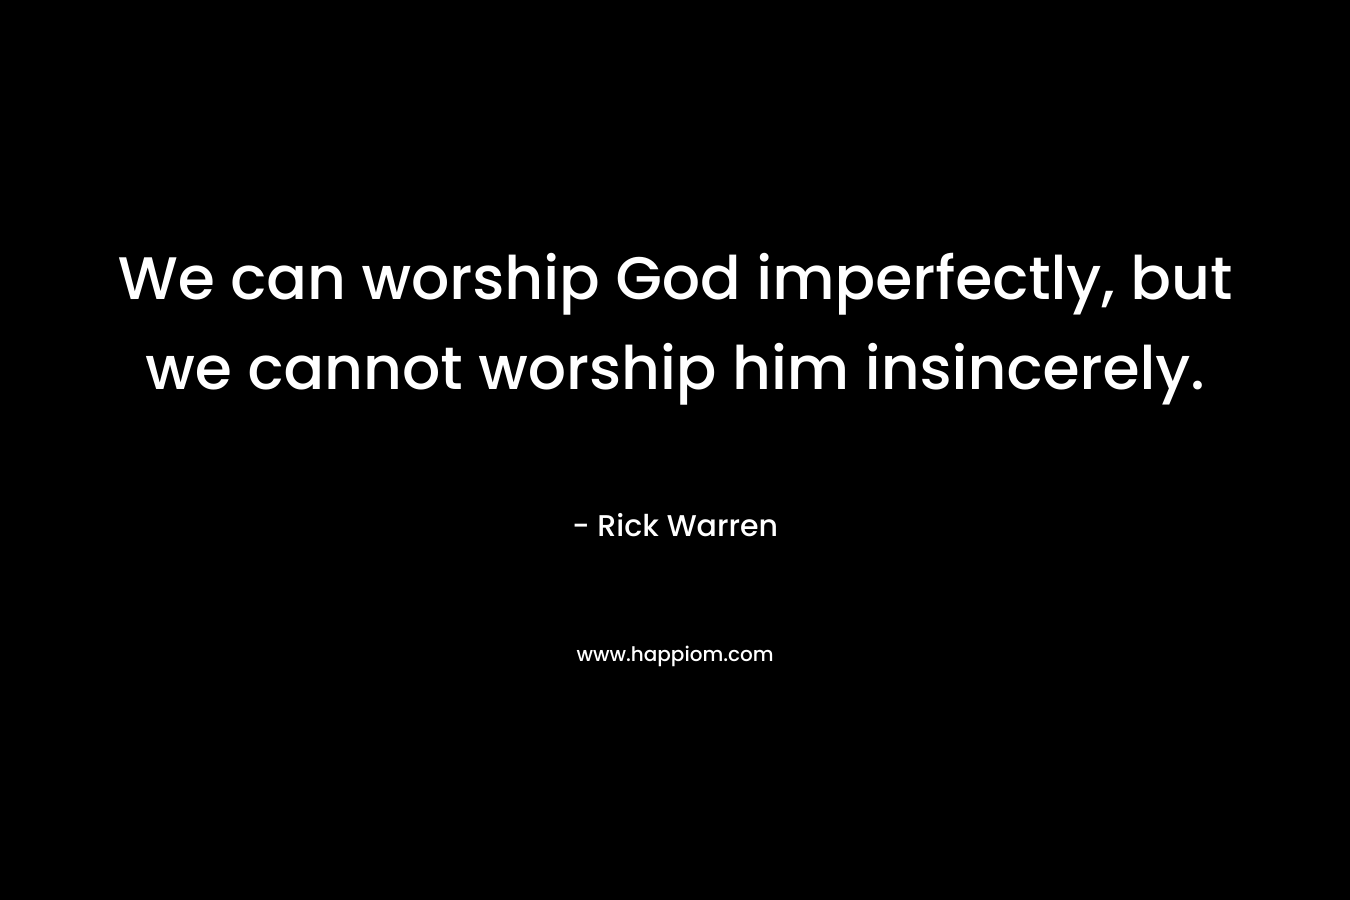 We can worship God imperfectly, but we cannot worship him insincerely.